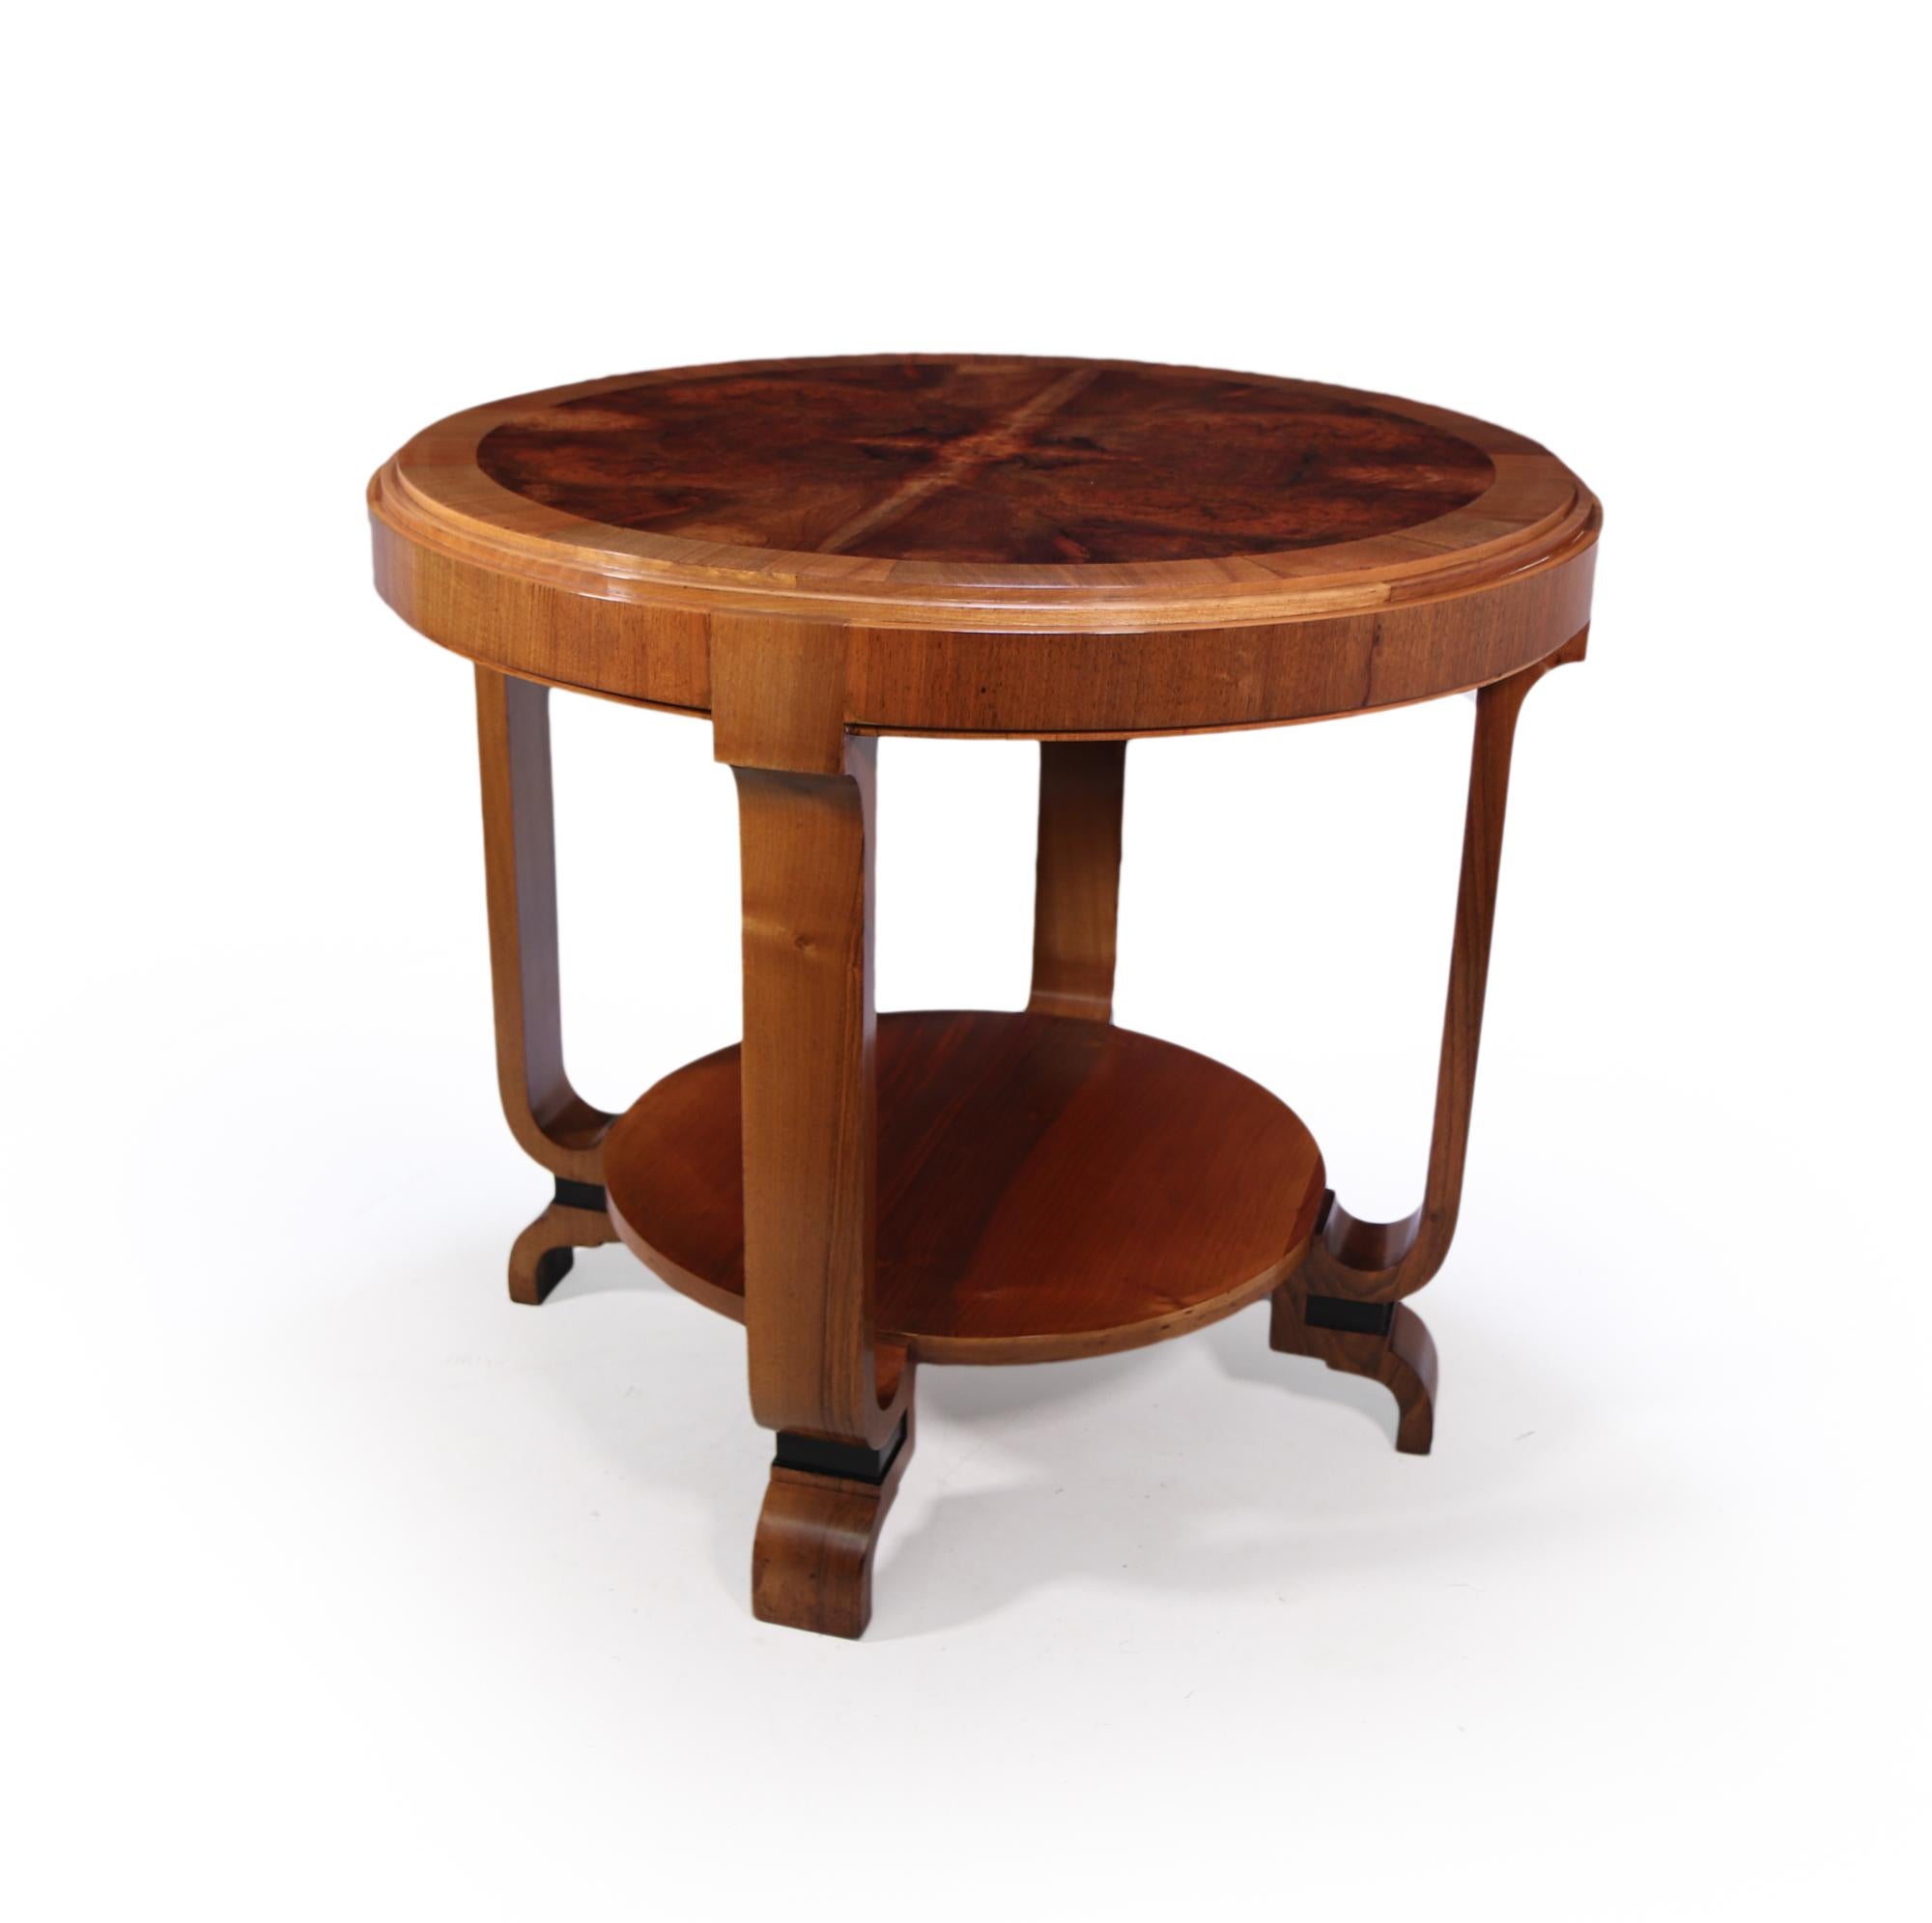 A good sized Greek influenced center table with cross banded walnut top, double stepped standing on shaped legs with a lower tier great quality. The table has been restored where necessary and fully polished by hand and in excellent condition